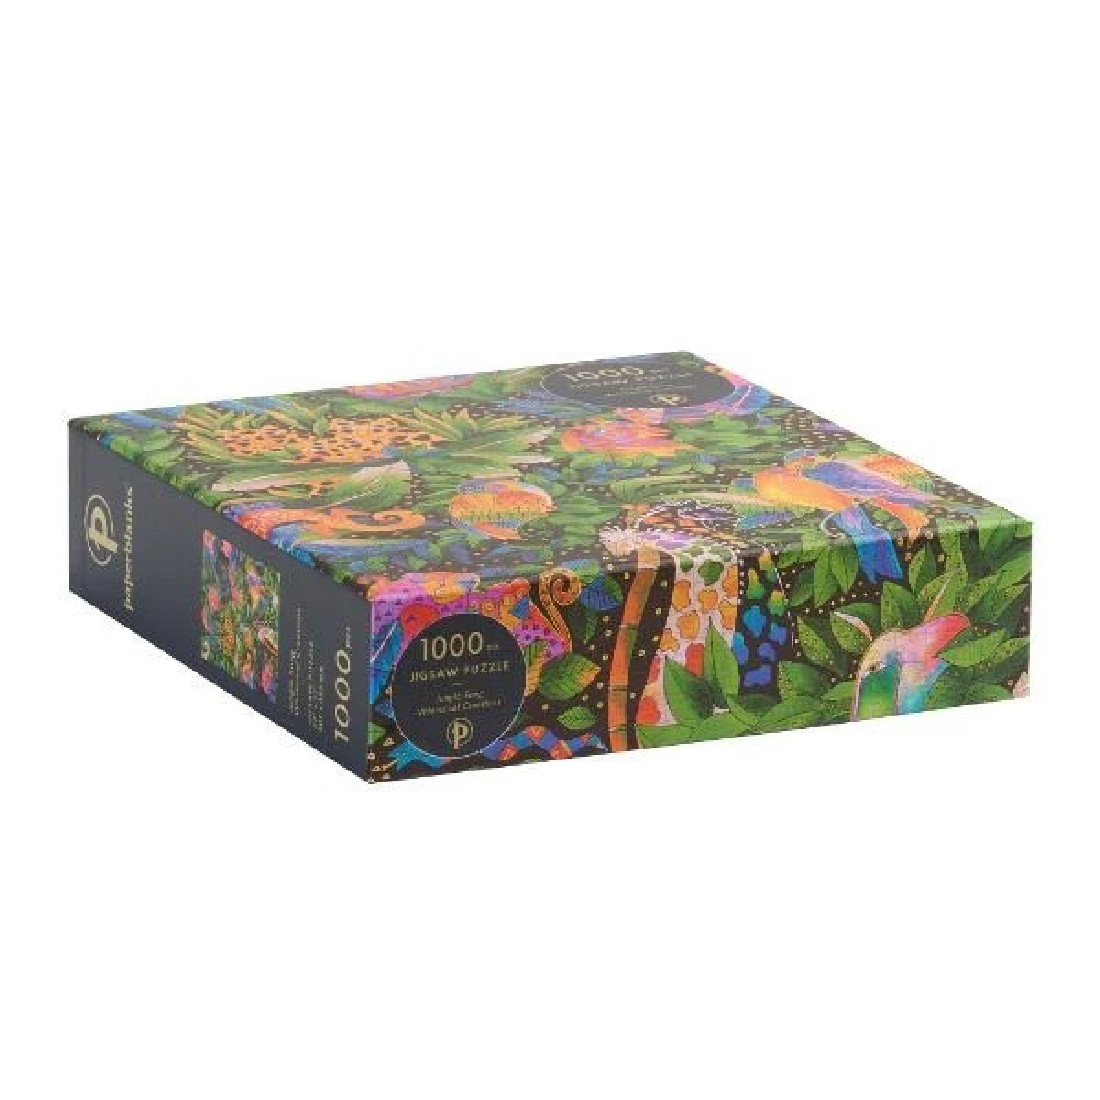 Jigsaw puzzle 1000pcs, Jungle Song, Whimsical collection Paperblanks